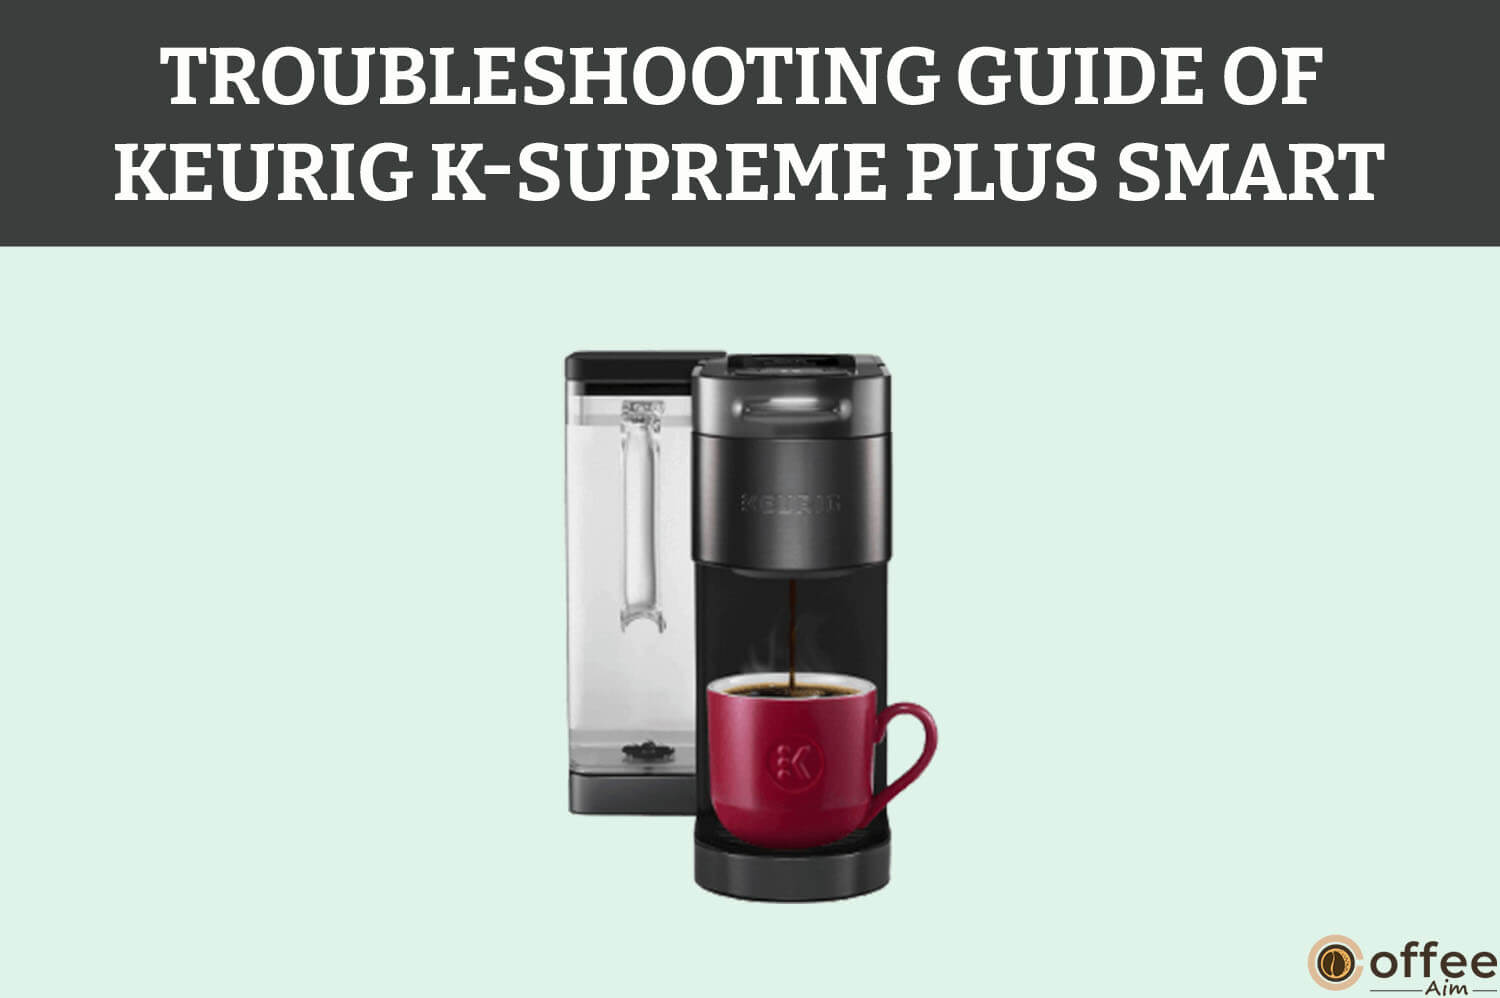 Featured image for the article "Troubleshooting Guide of Keurig K supreme Plus Smart"